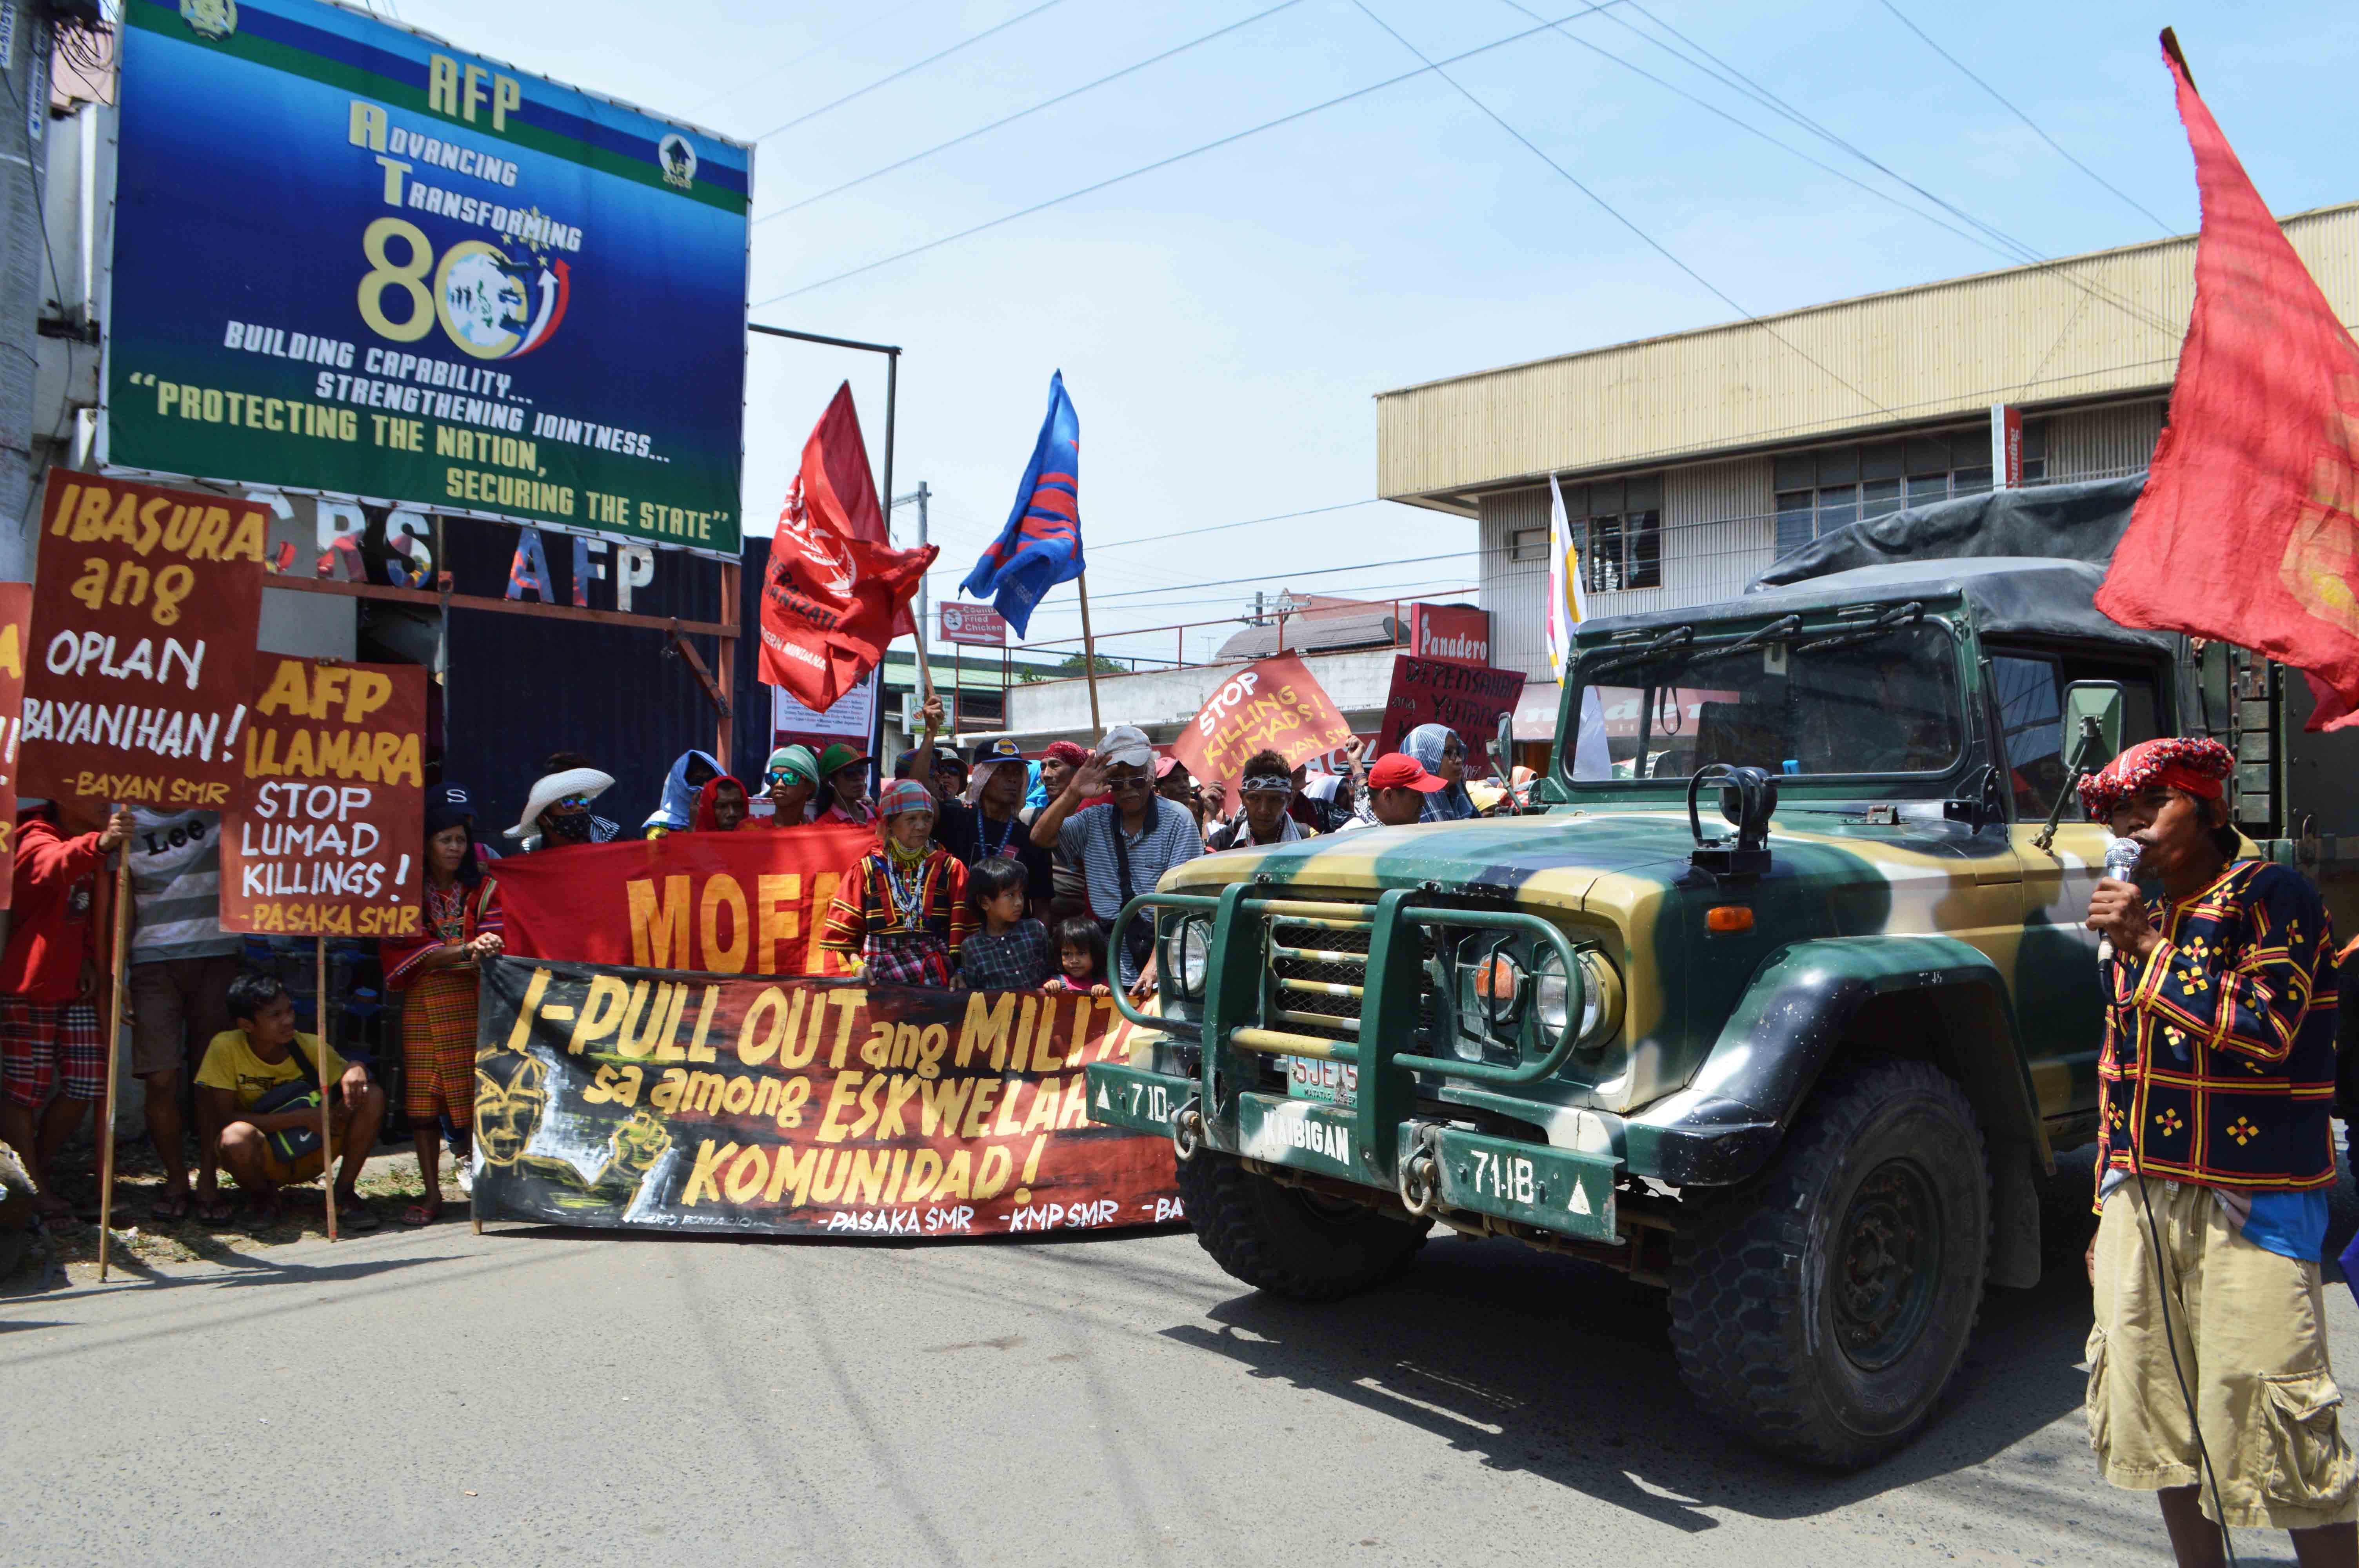 A military truck pass by the rally outside the headquarters of the Eastern Mindanao Command.